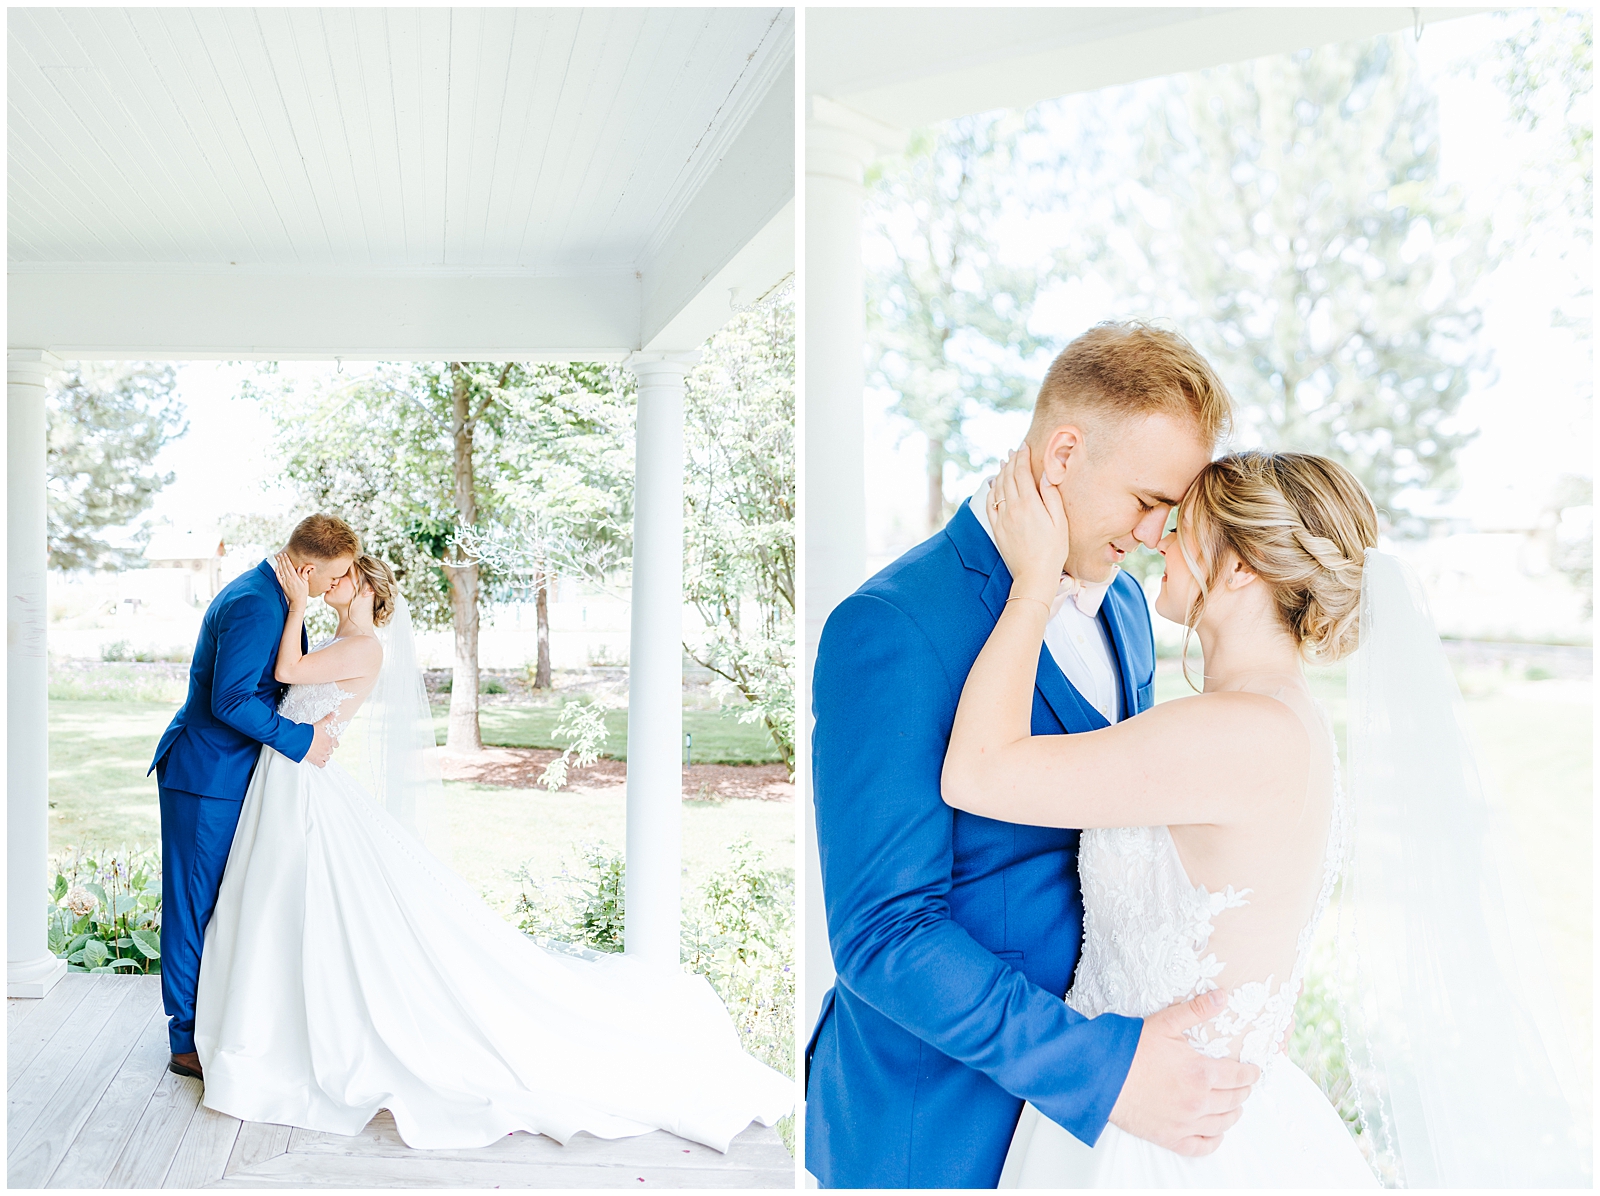 White Porch Bride and Groom Portraits at Fourth Street Gardens Wedding